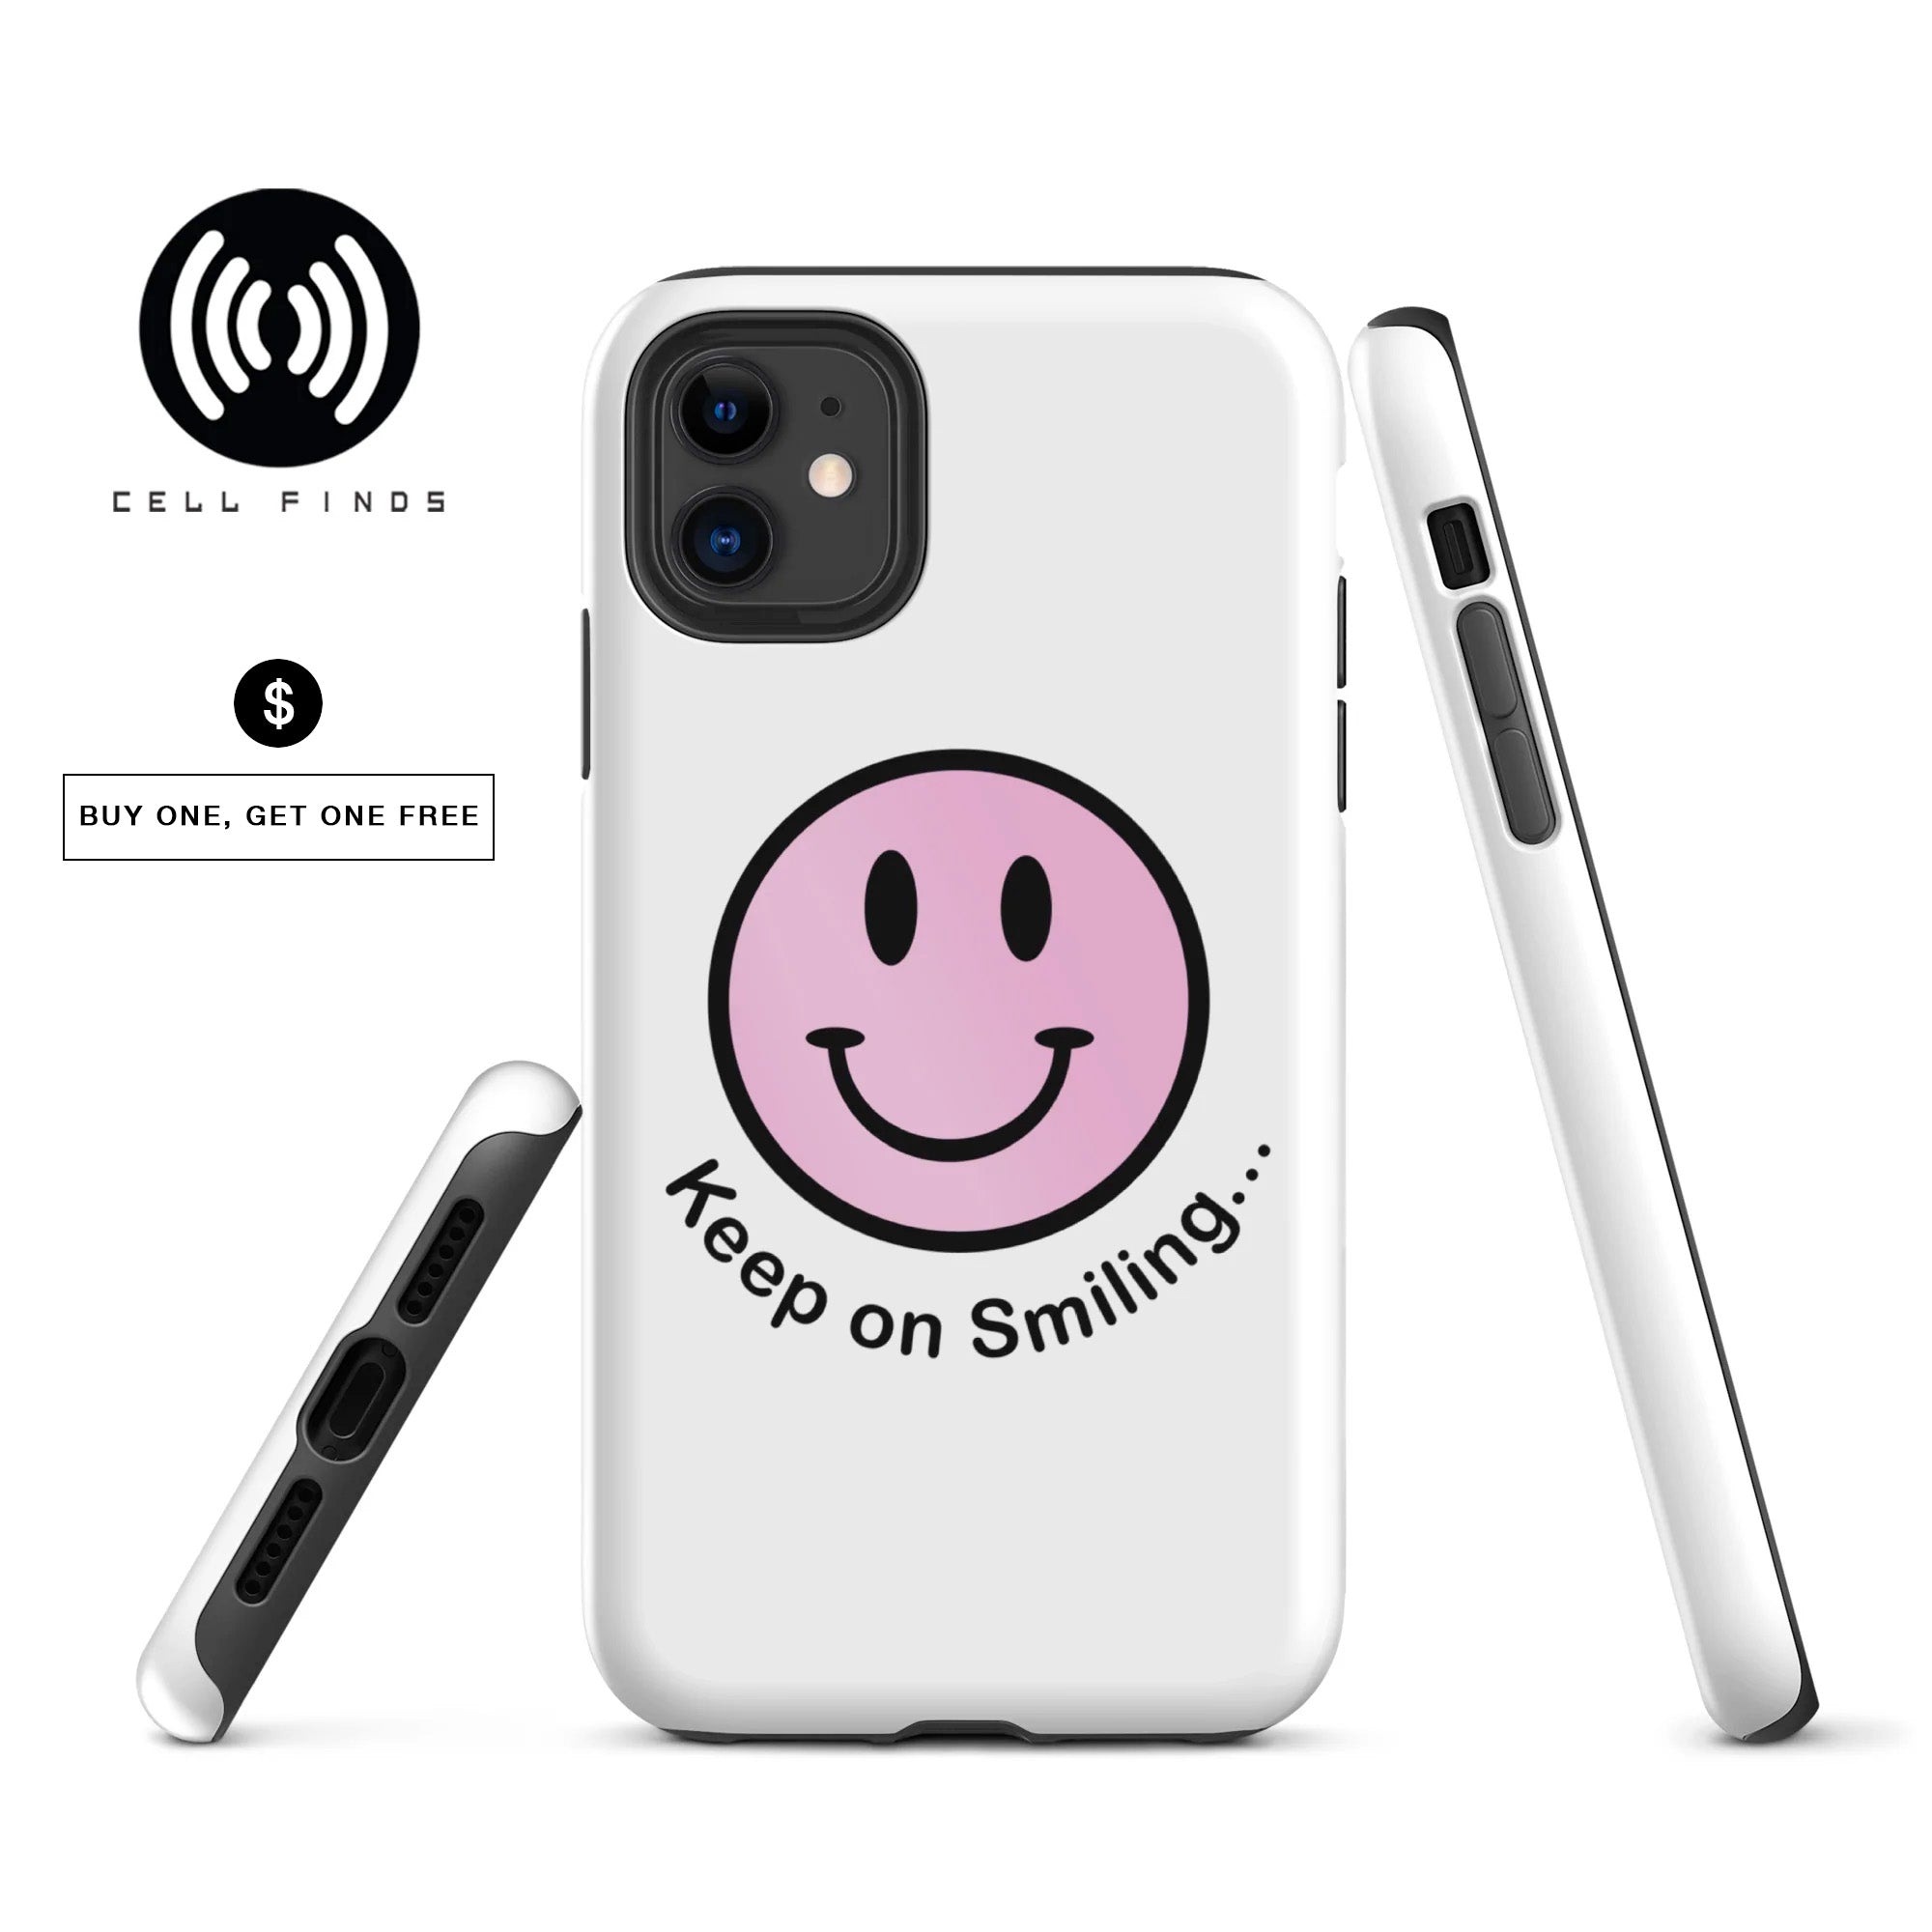 Pink Happy Face iPhone Case - All Sizes